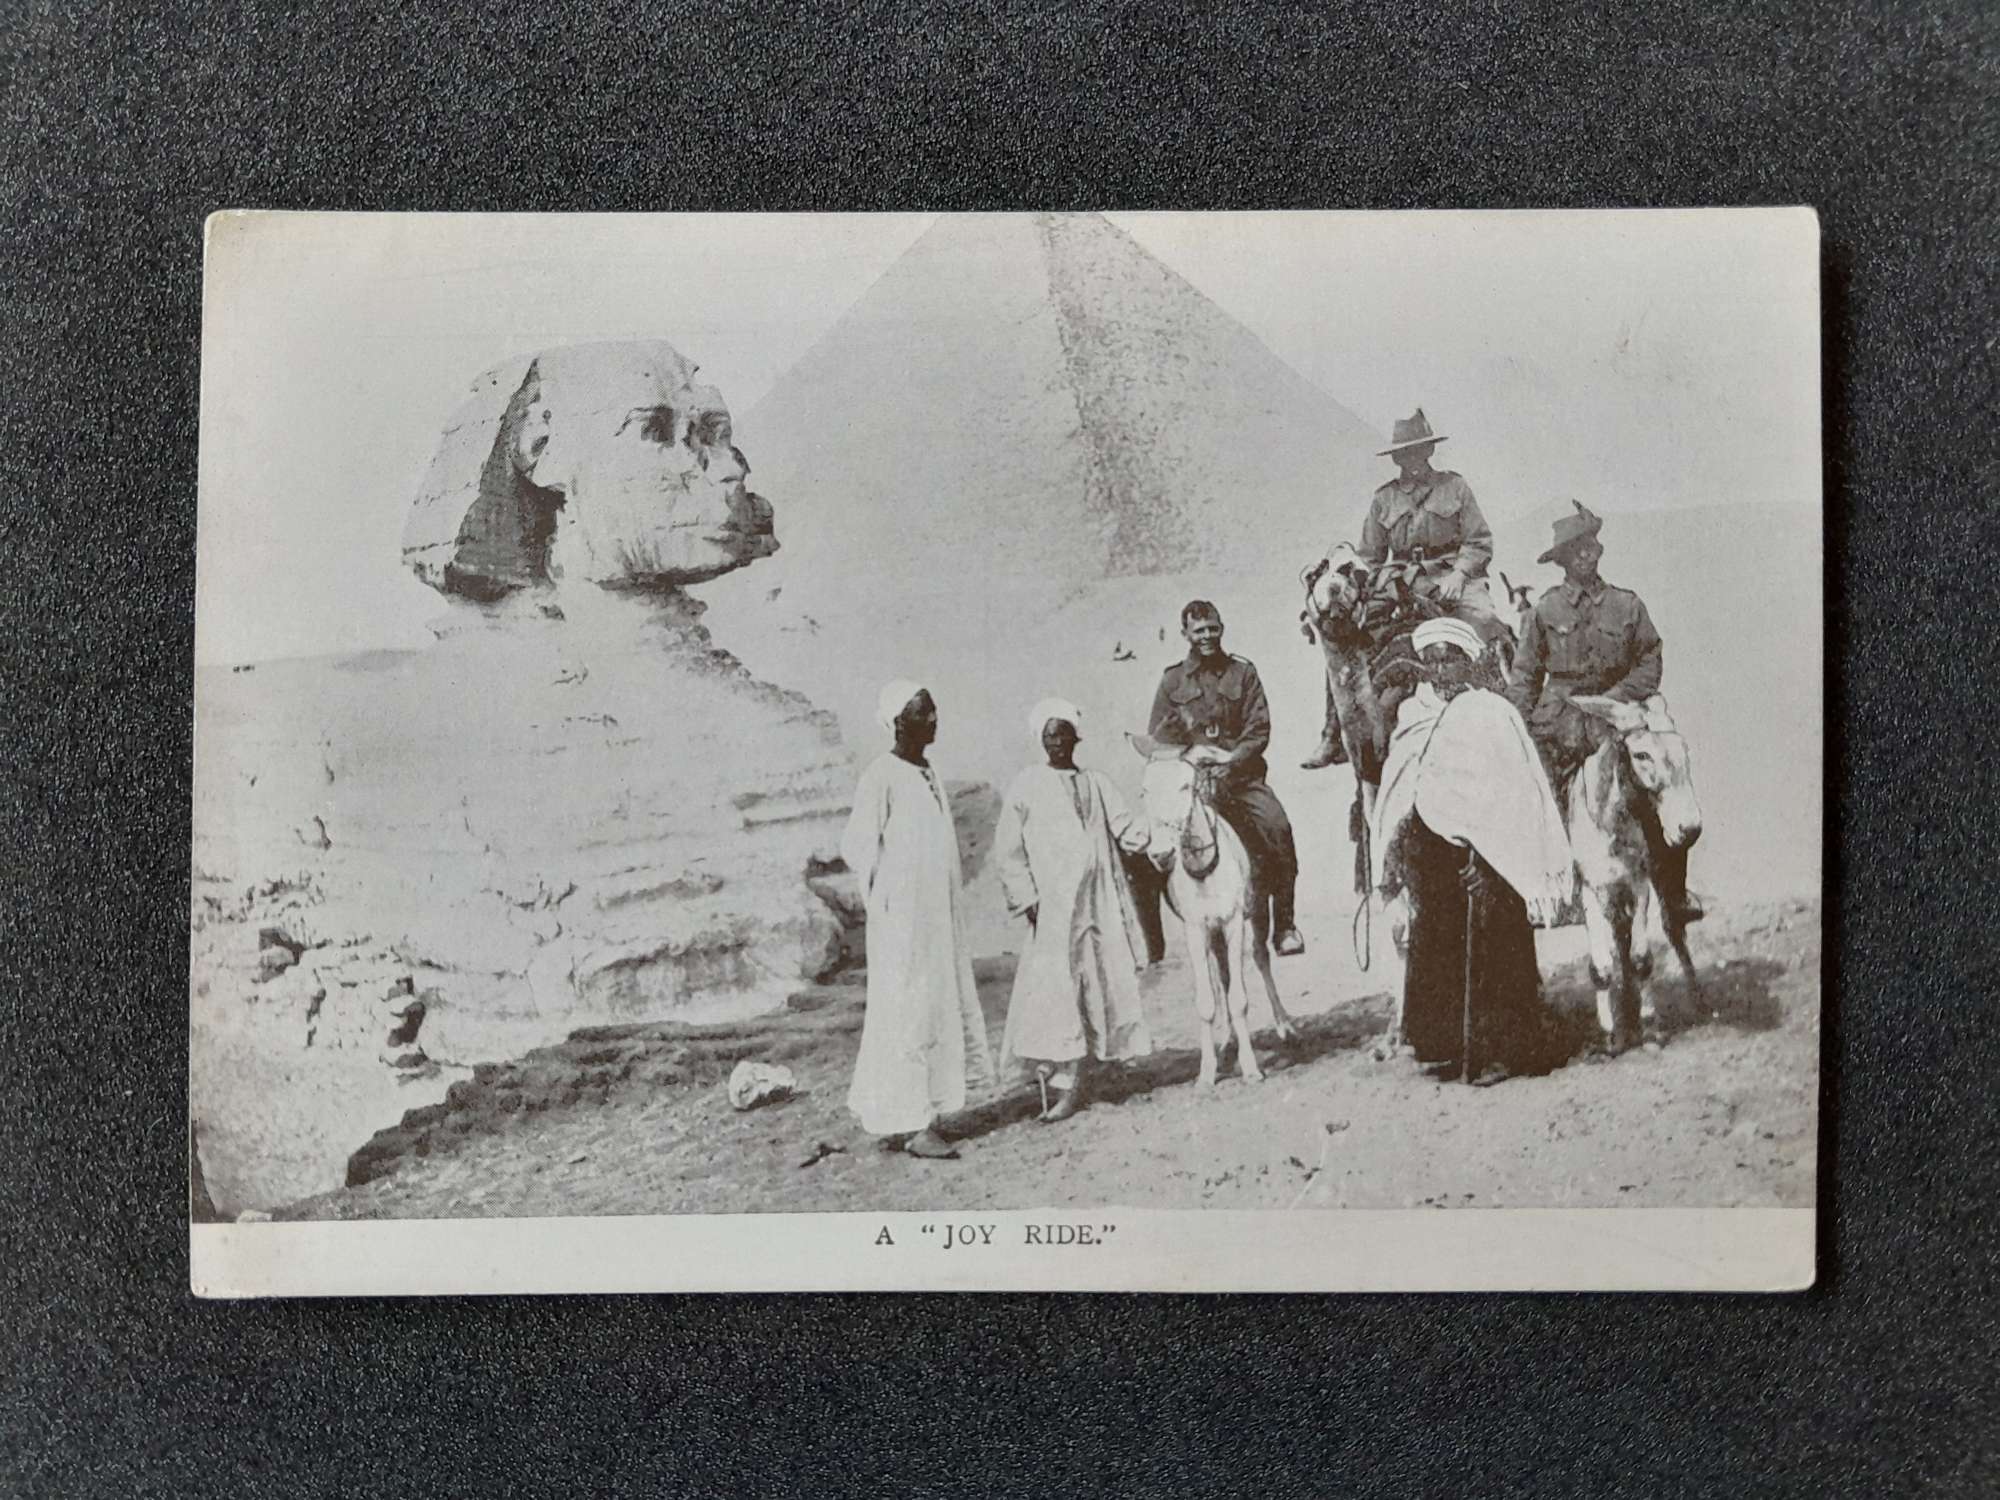 A Joy Ride troops Infront of the Pyramids